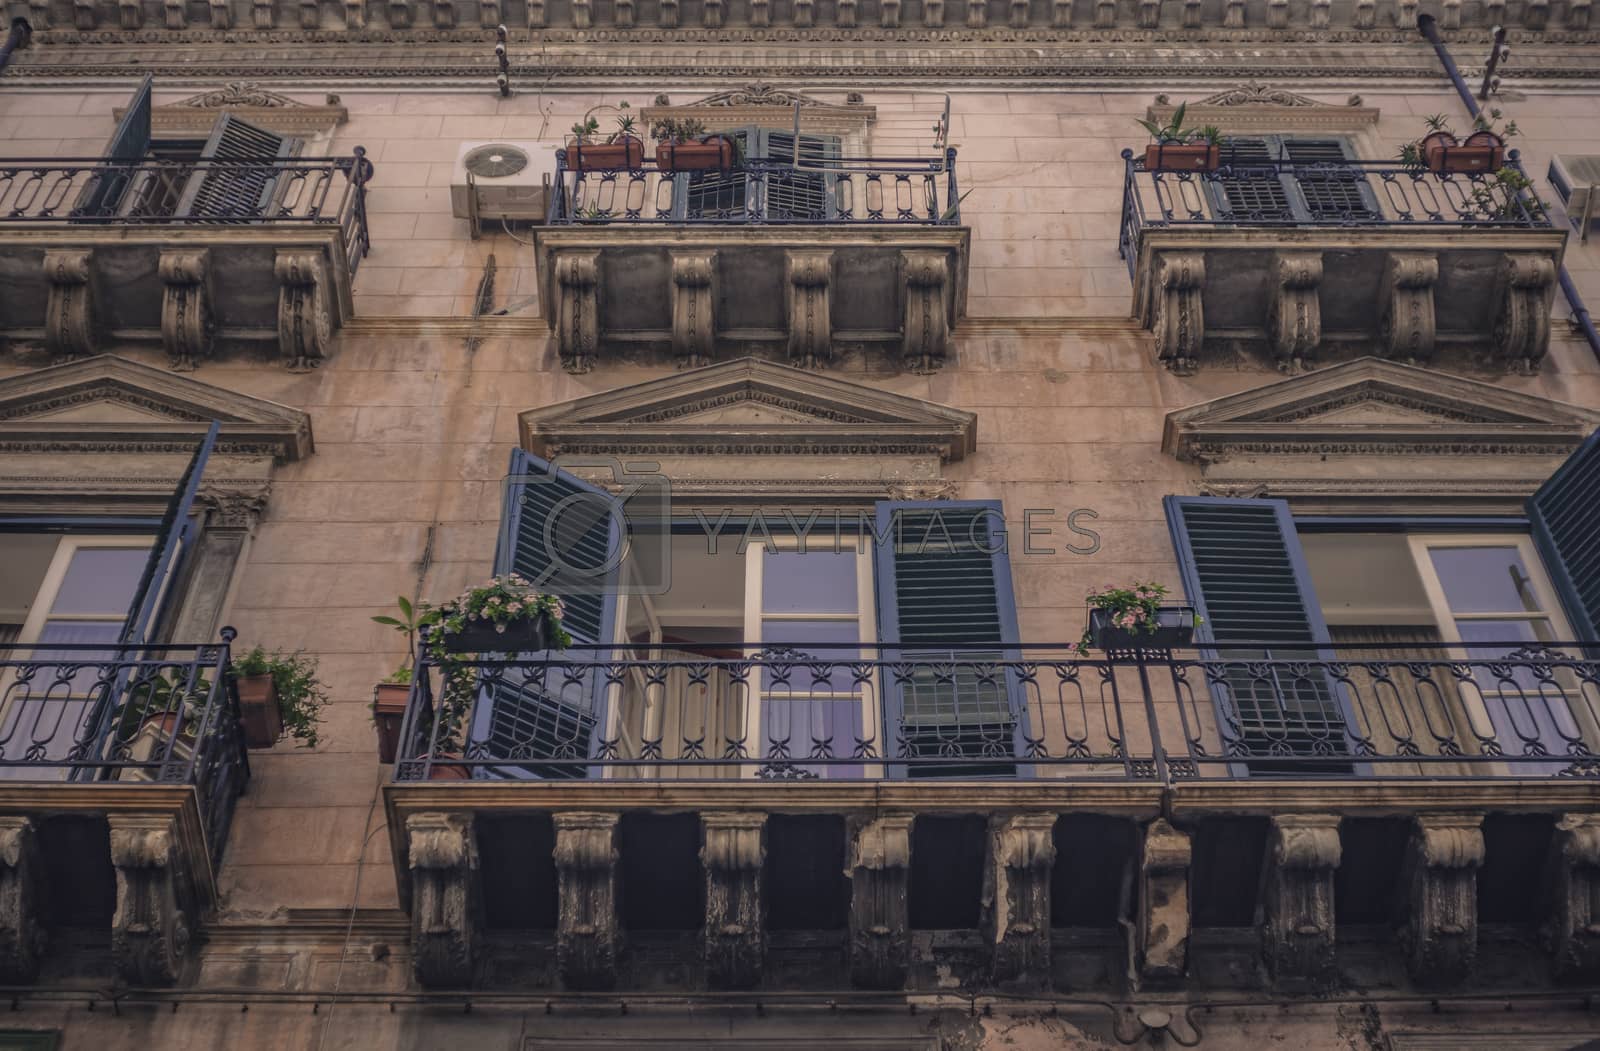 Royalty free image of Palermo's Balcony building by pippocarlot